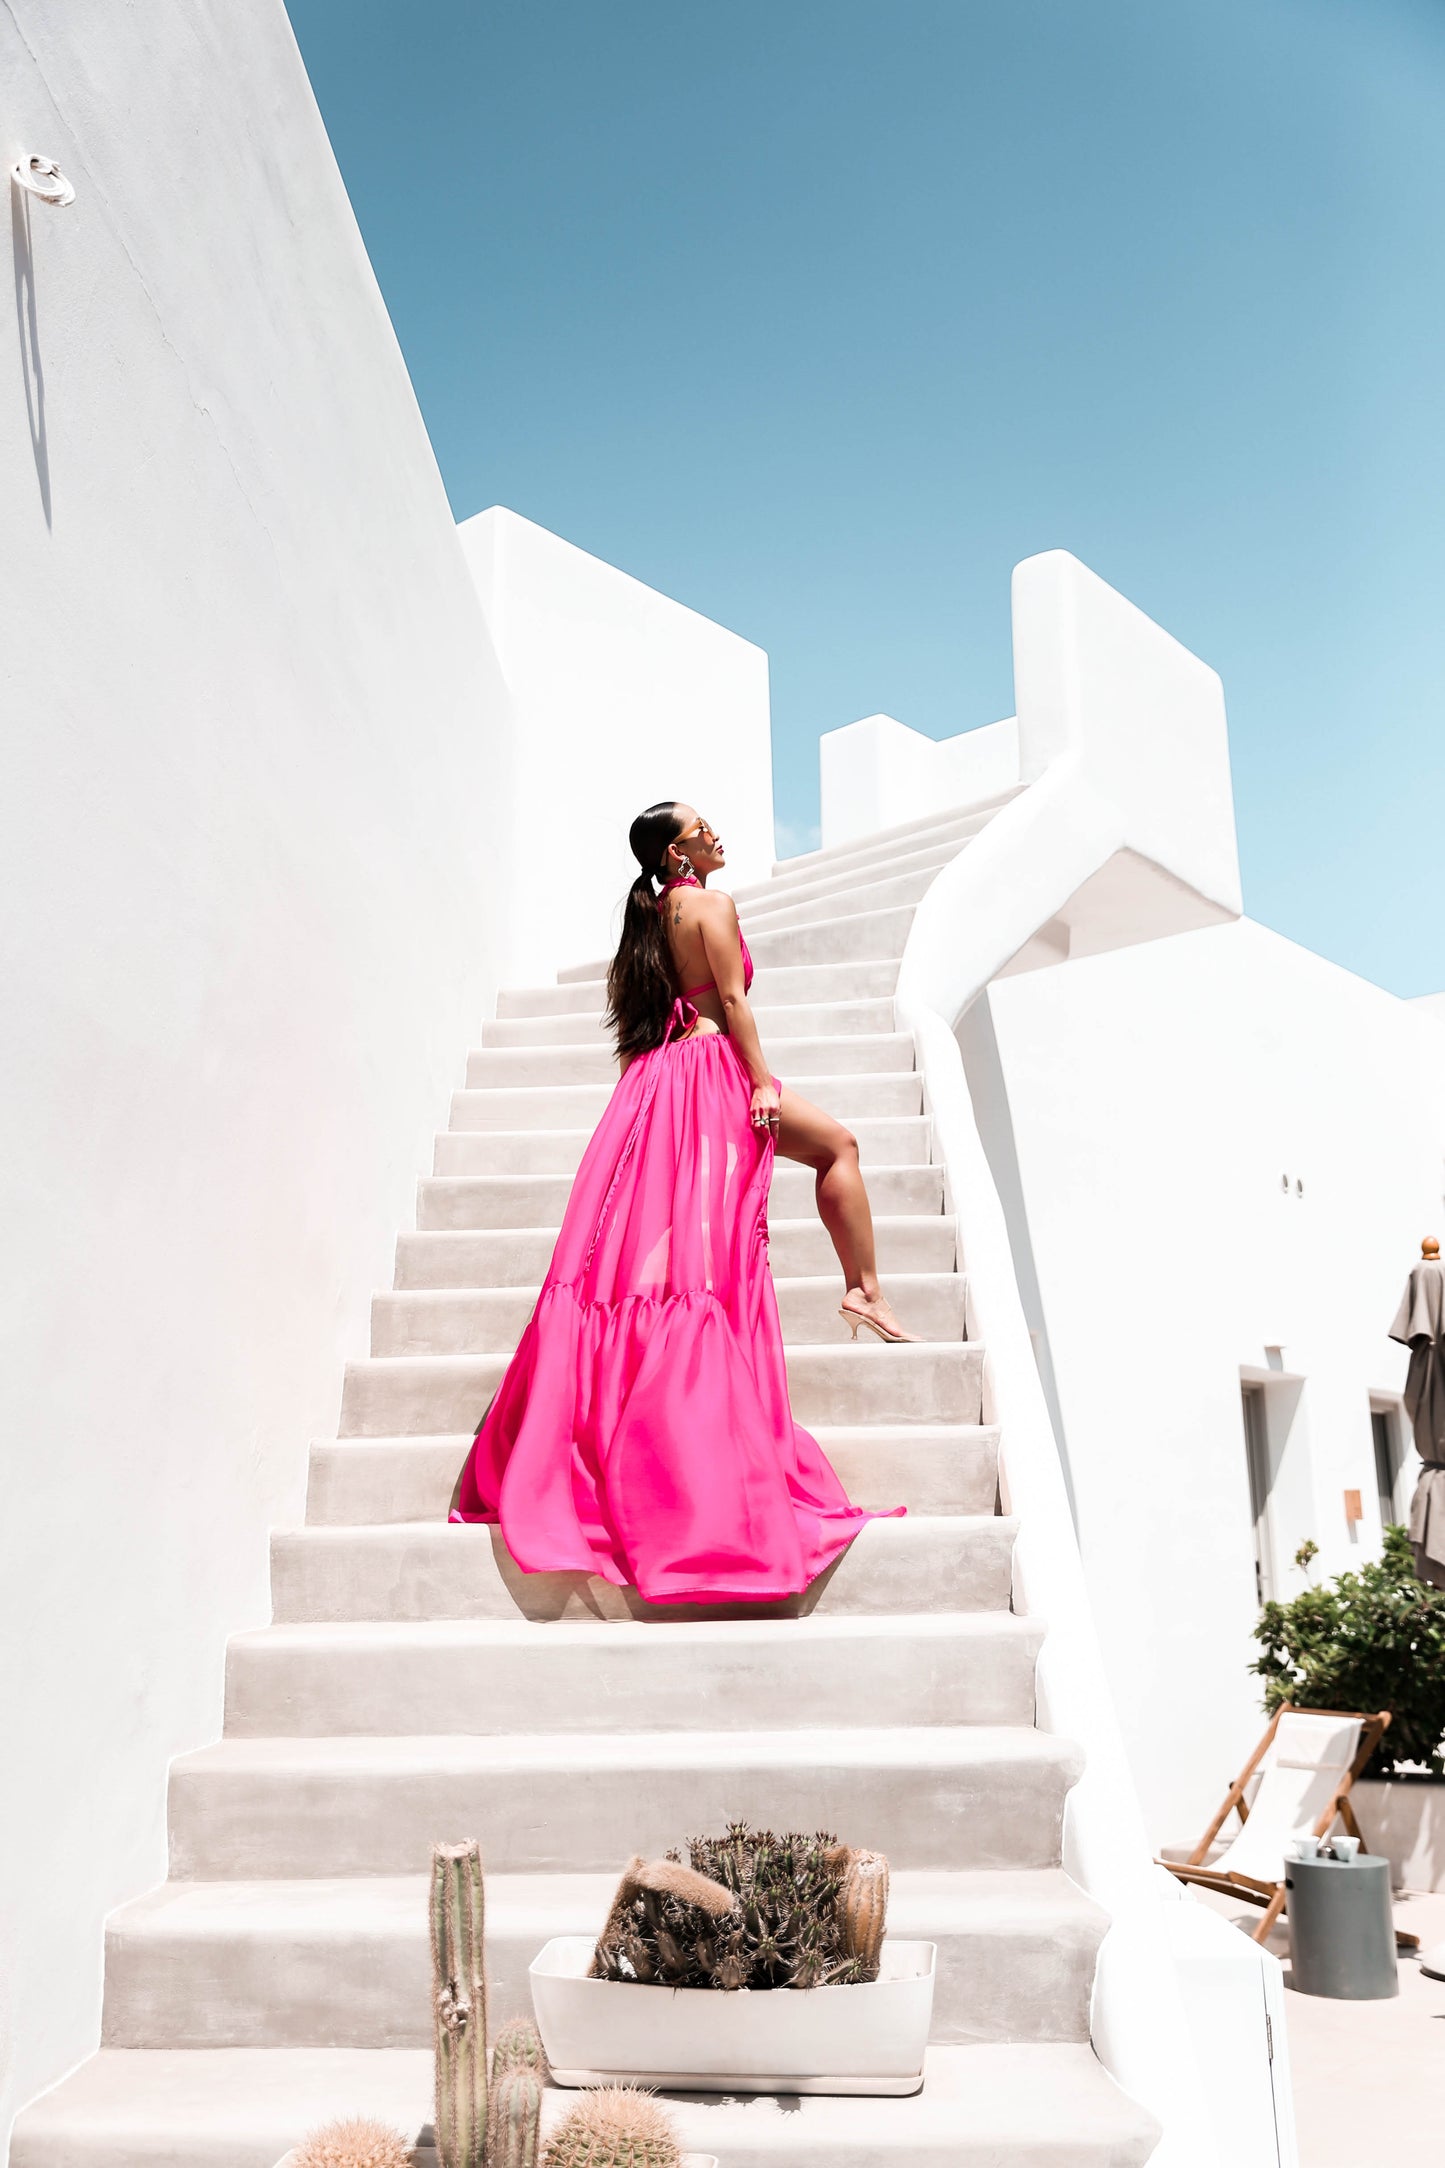 MADE TO ORDER: The Mykonos Dress (Sheer)